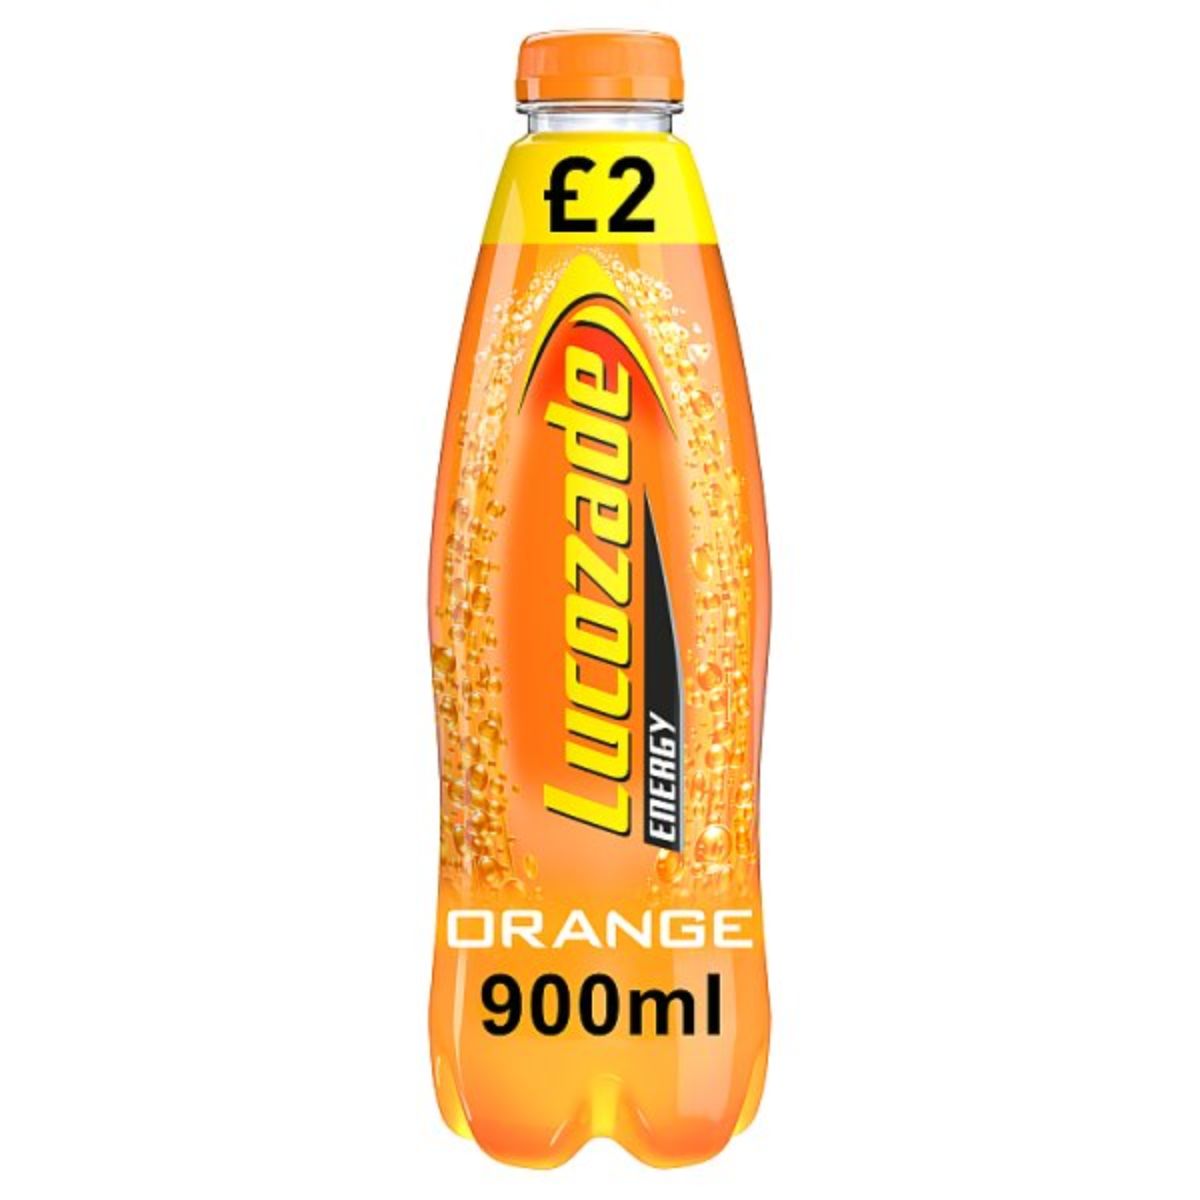 A bottle of Lucozade - Energy Drink Orange - 900ml on a white background.